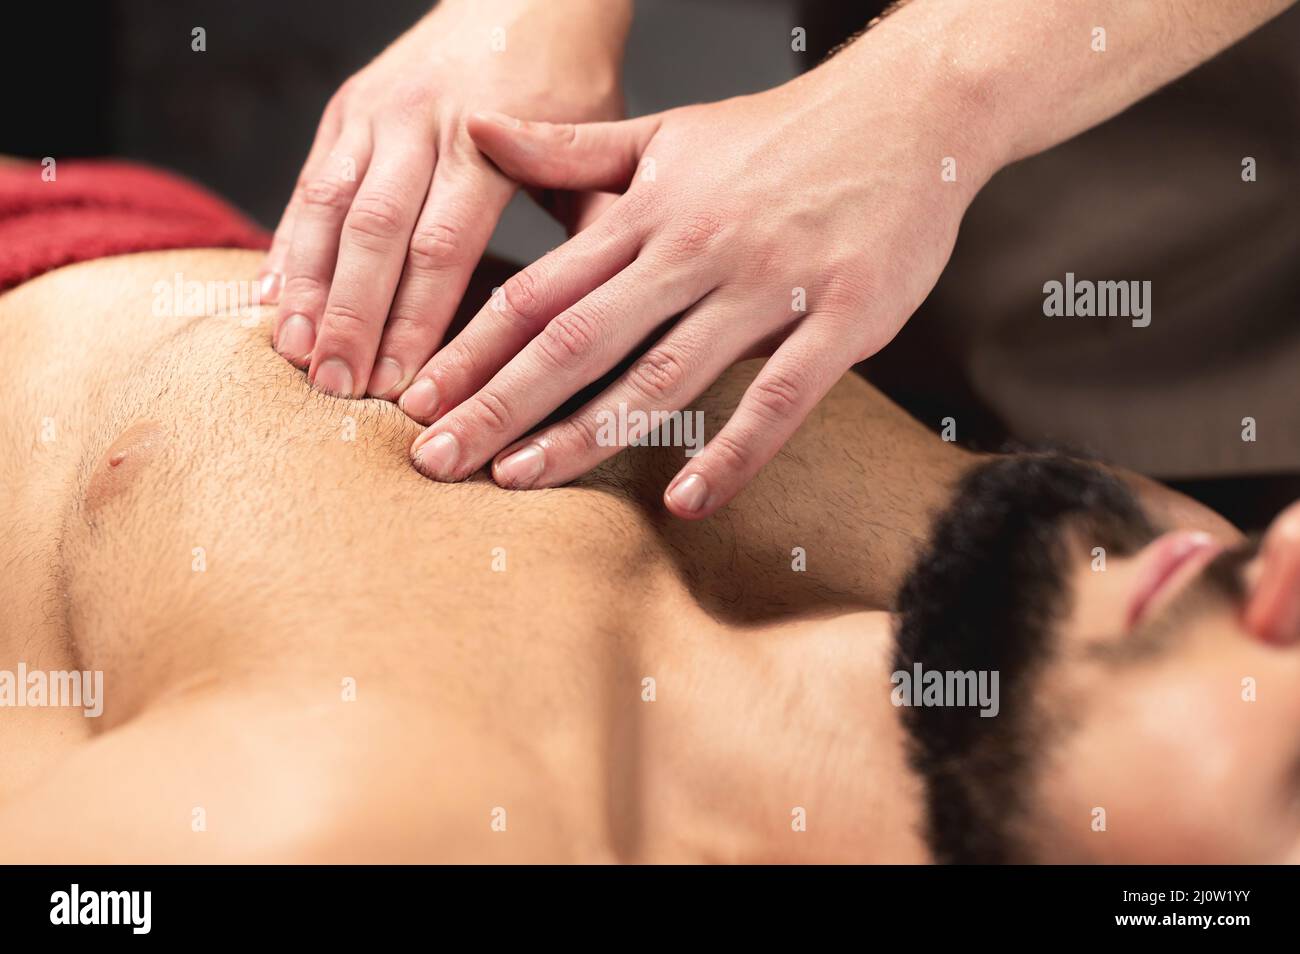 A professional therapist massages the pectoral muscle of an athlete to a man in a professional massage salon. The concept of pro Stock Photo